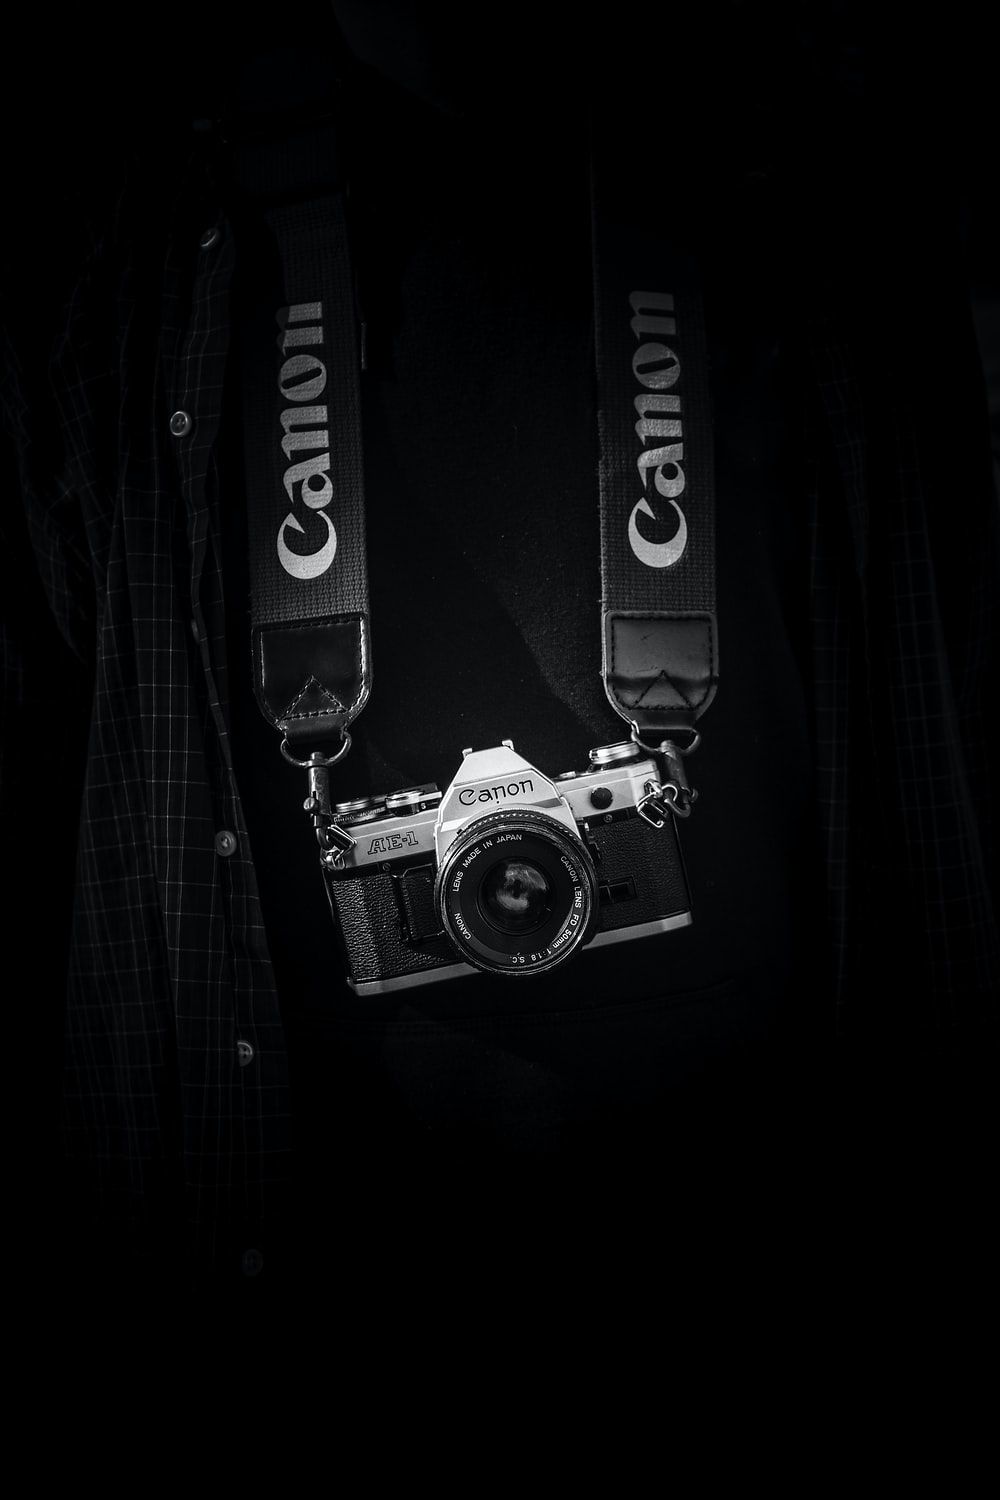 Canon Picture. Download Free Image